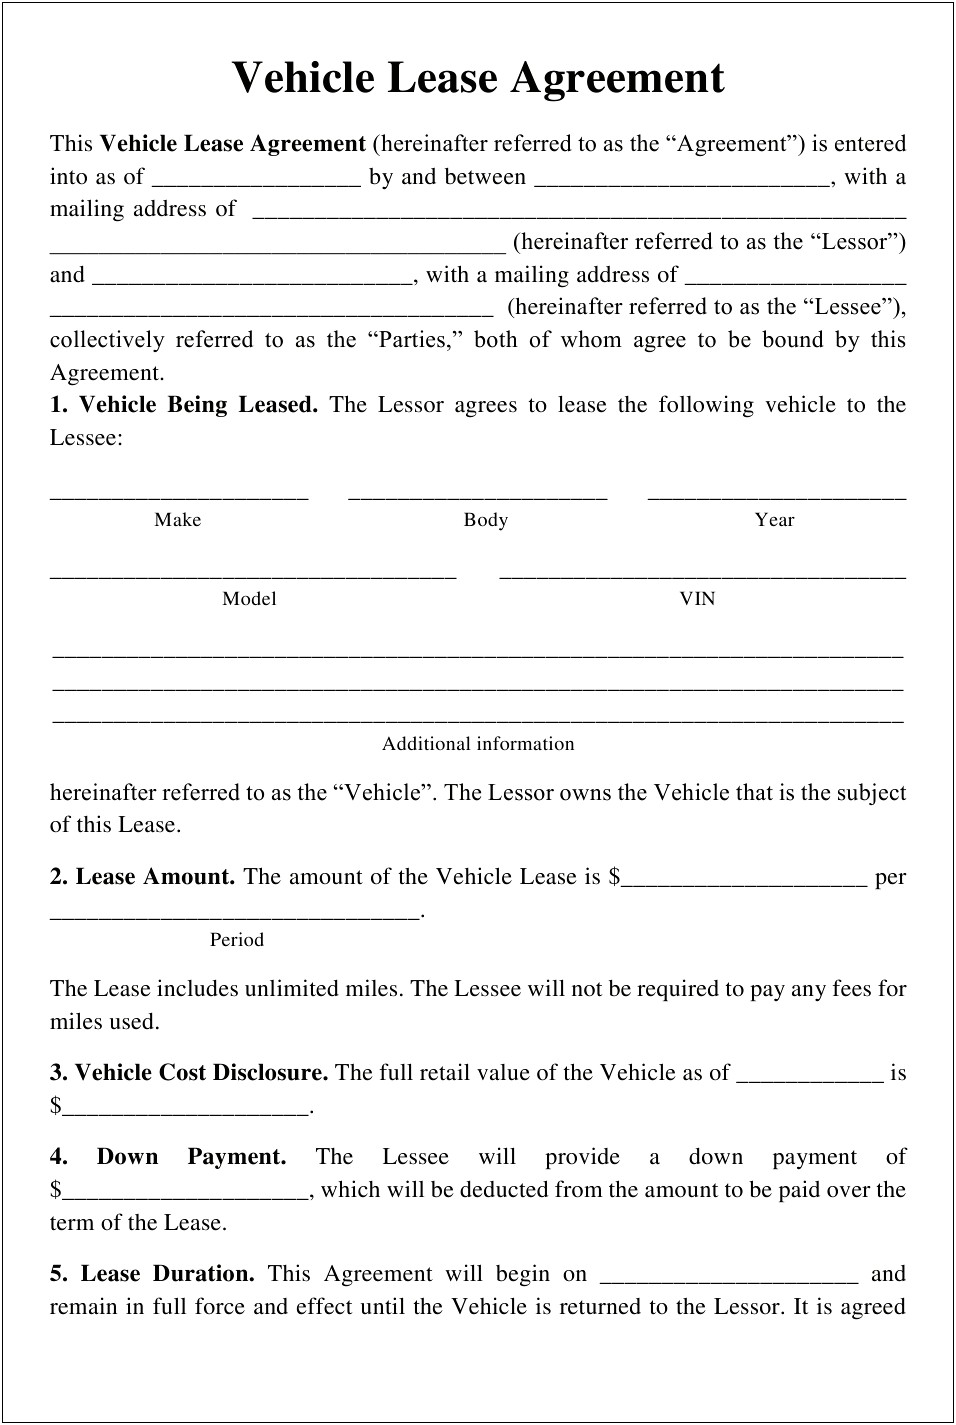 Free Vehicle Lease Agreement Template South Africa